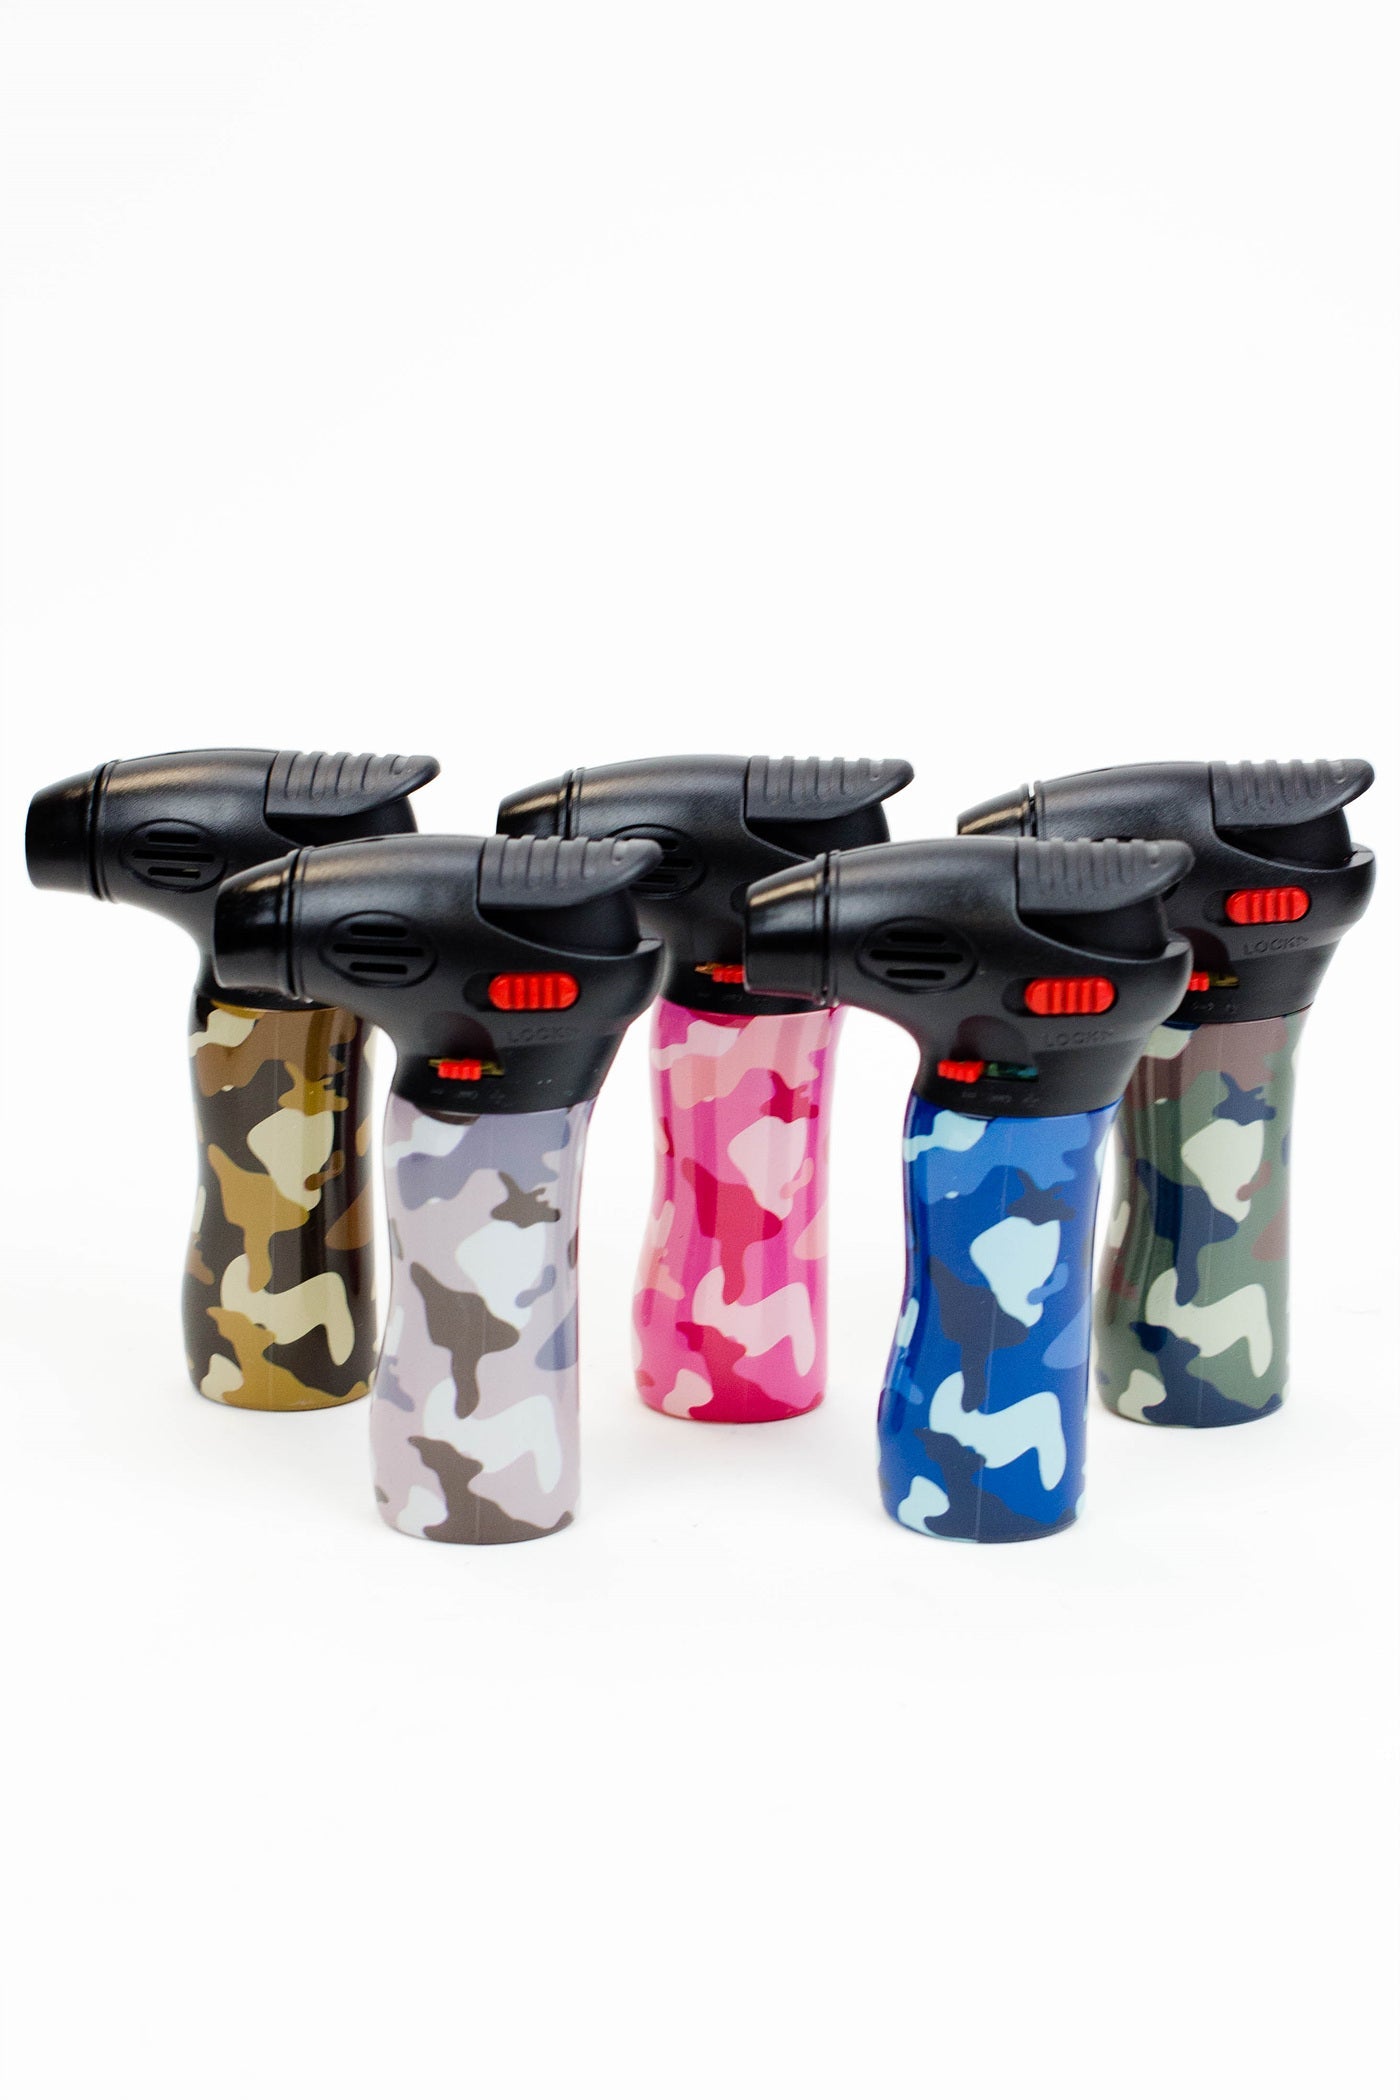 New! Nibo easy grip deluxe torch lighter Box of 10_9